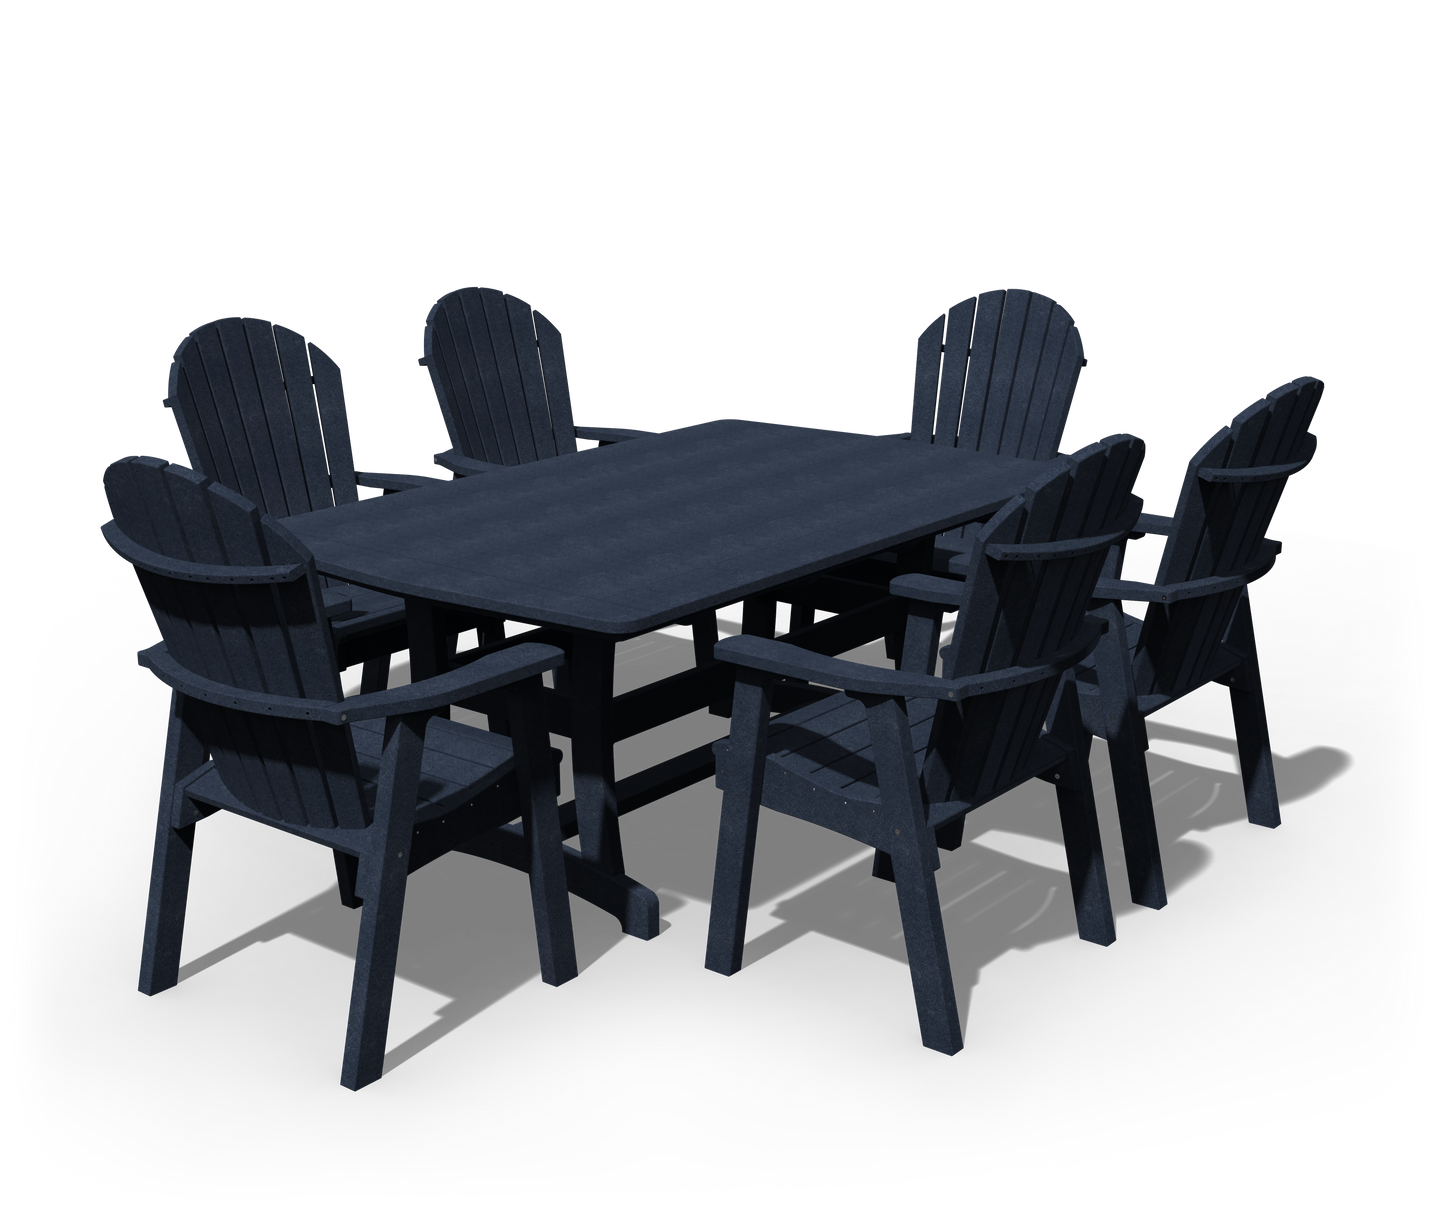 Patiova Recycled Plastic 4′ x 6′ Adirondack 7 Piece Dining Set  - LEAD TIME TO SHIP 3 Weeks